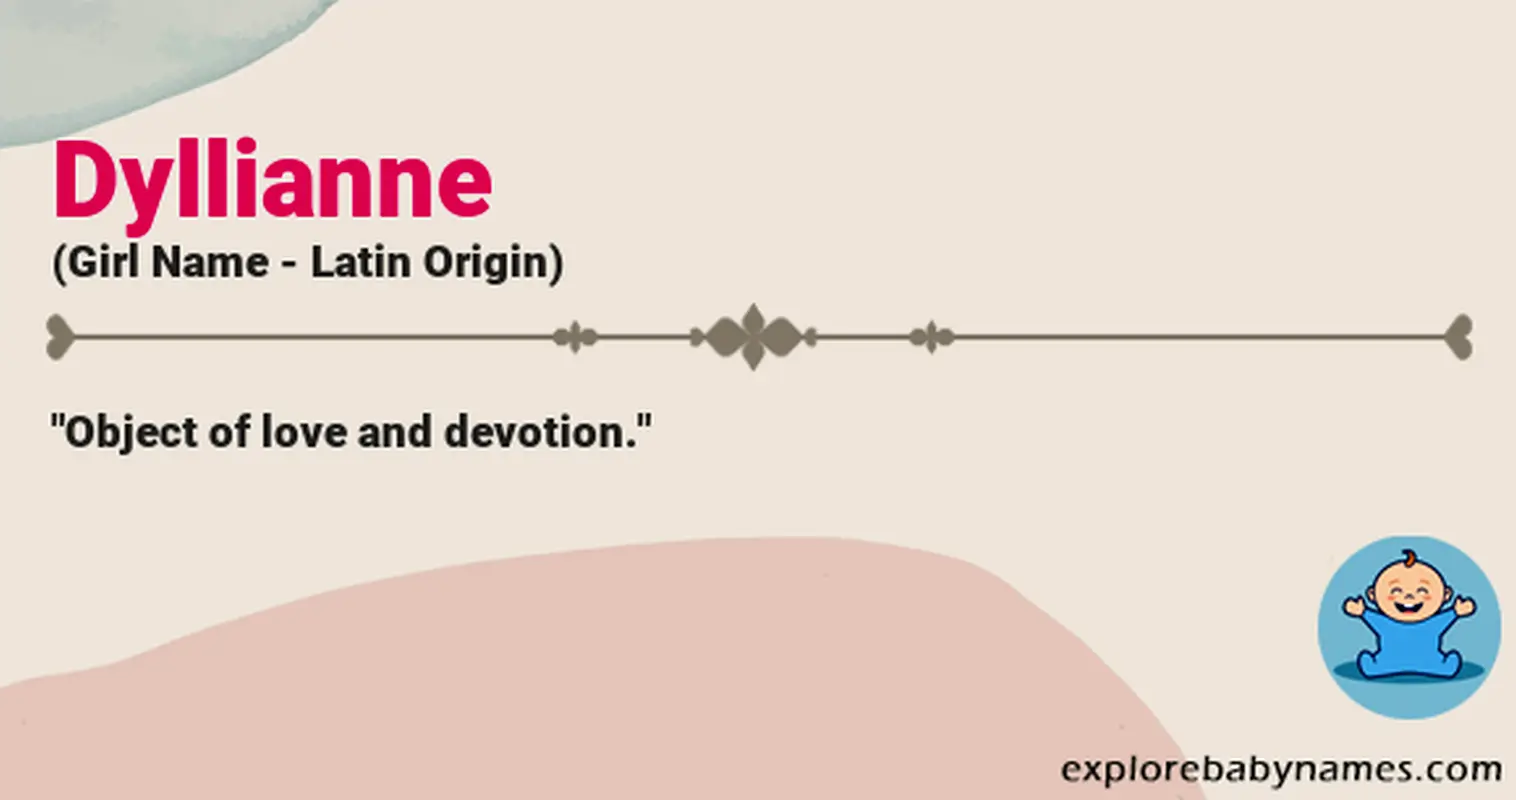 Meaning of Dyllianne